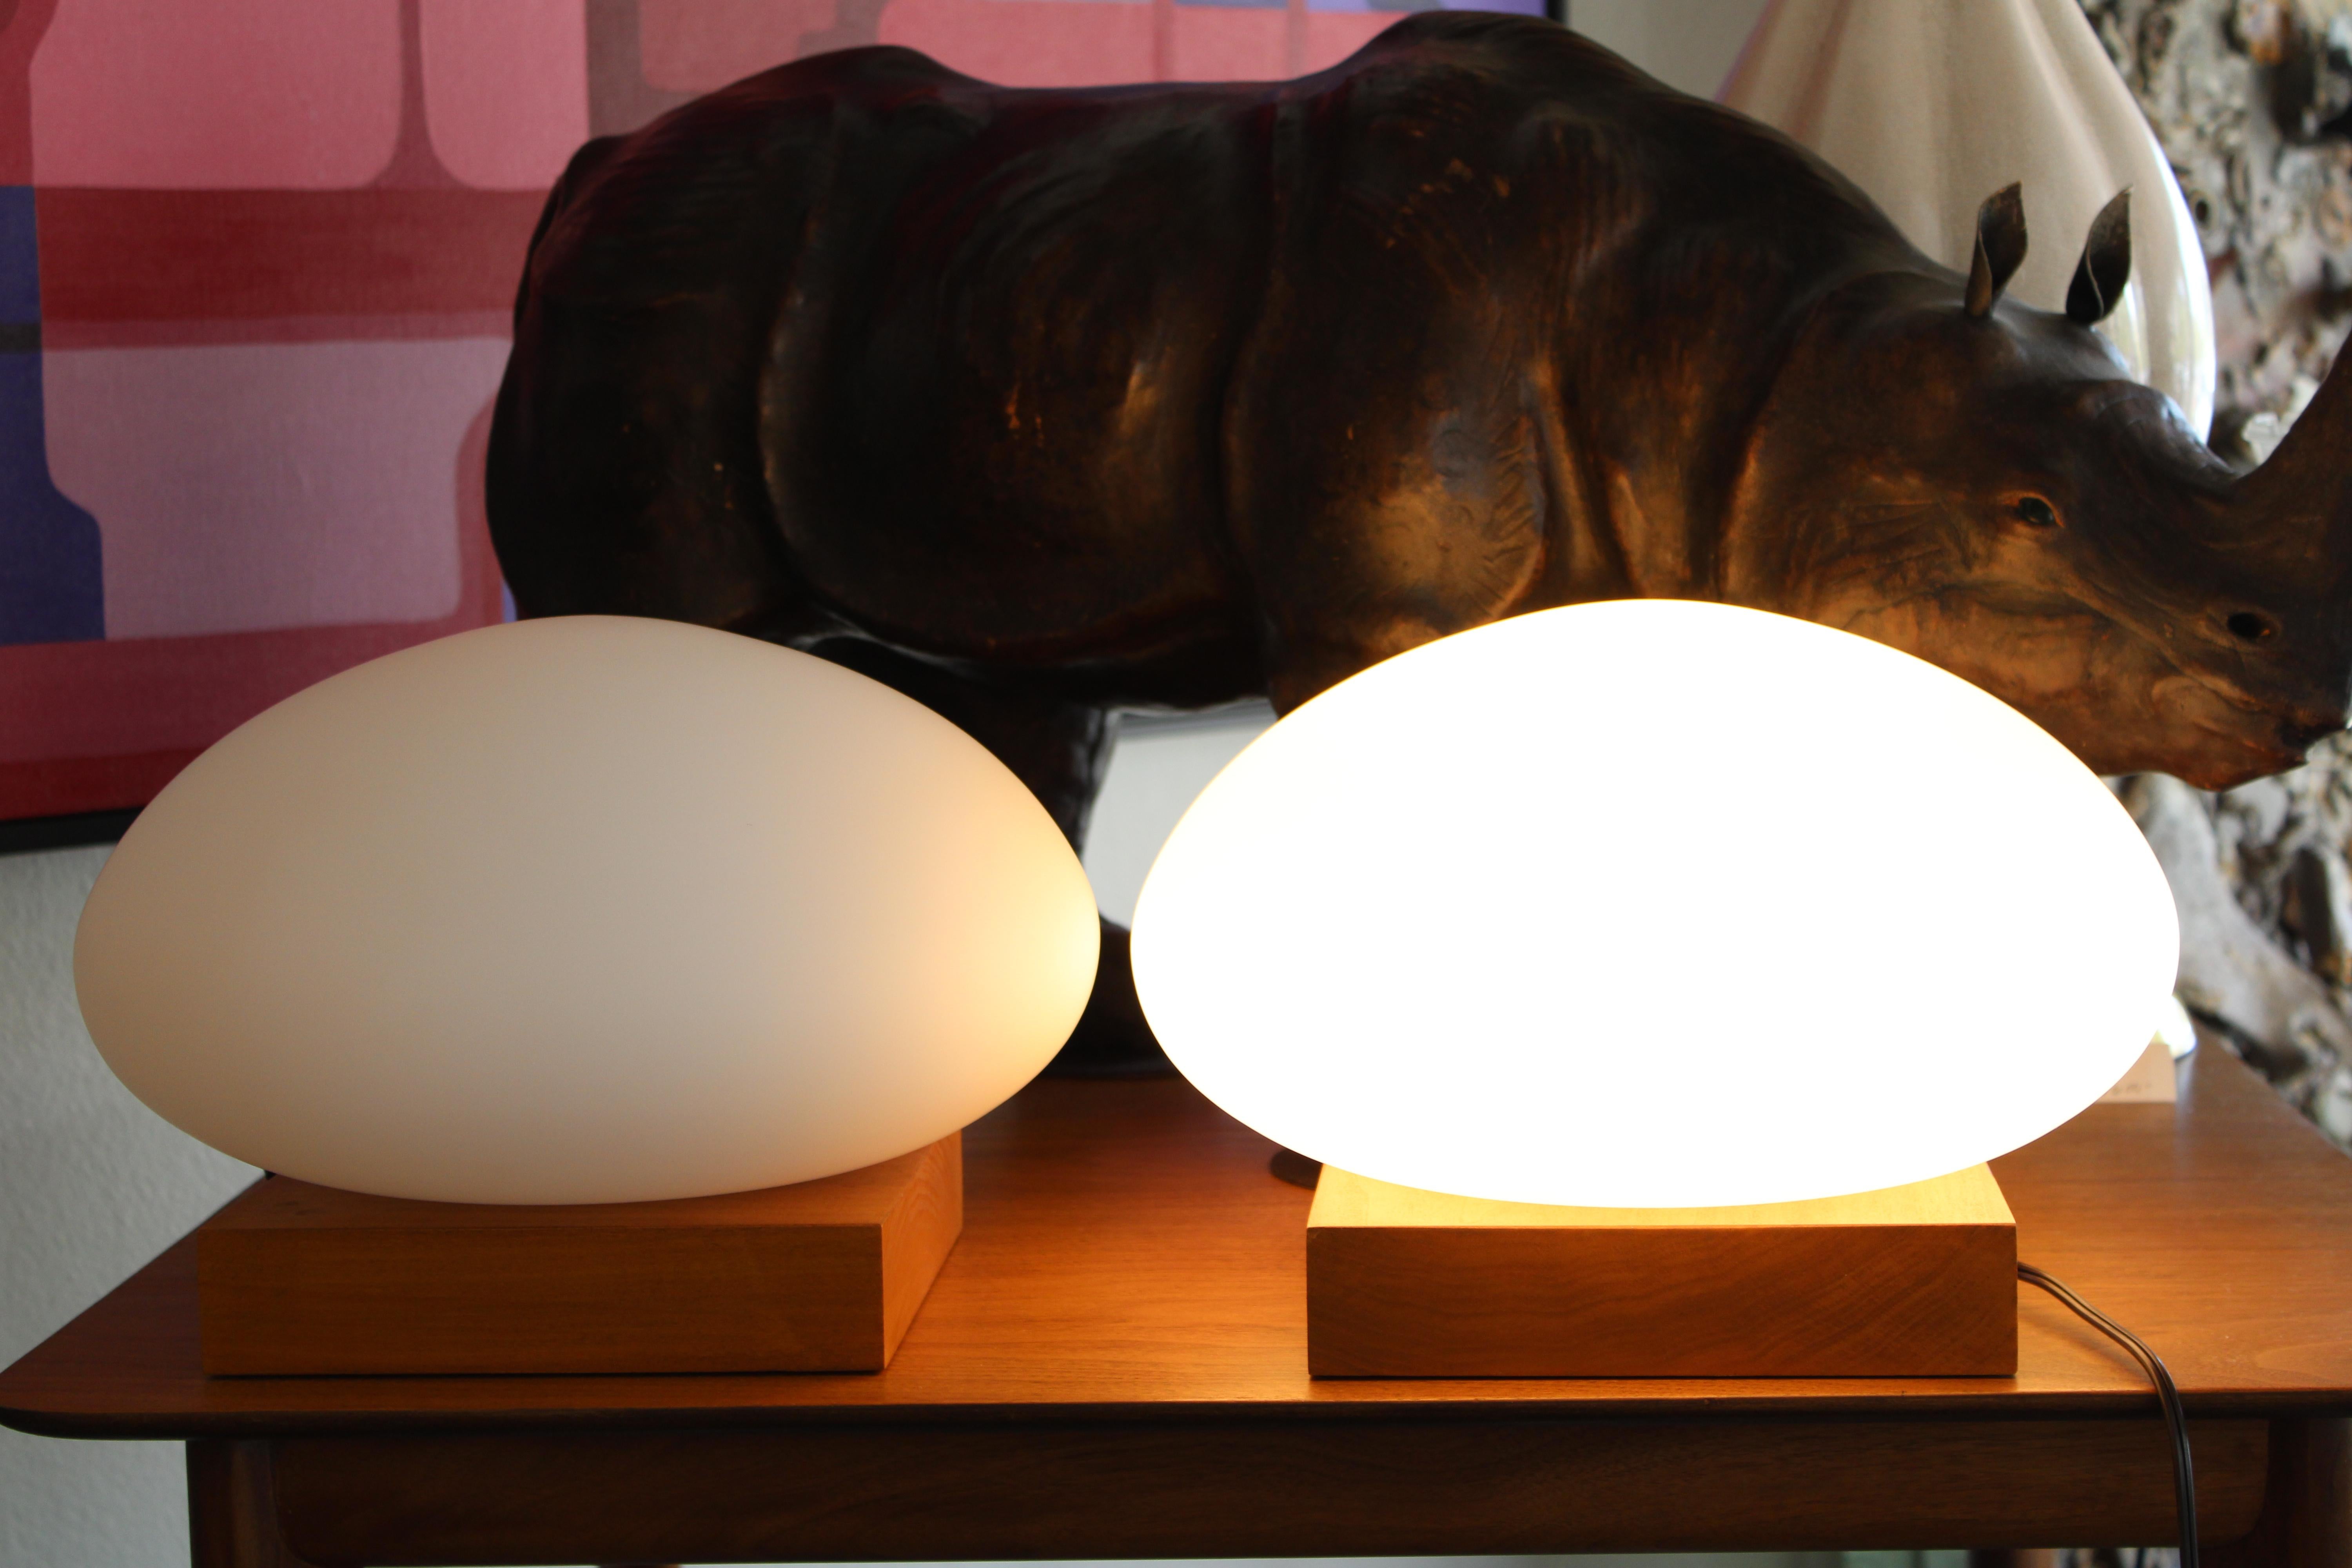 Pair of Mushroom table lamps in the style of lamps produced by the Laurel Lamp Company, Newark, NJ.  Walnut bases are 8